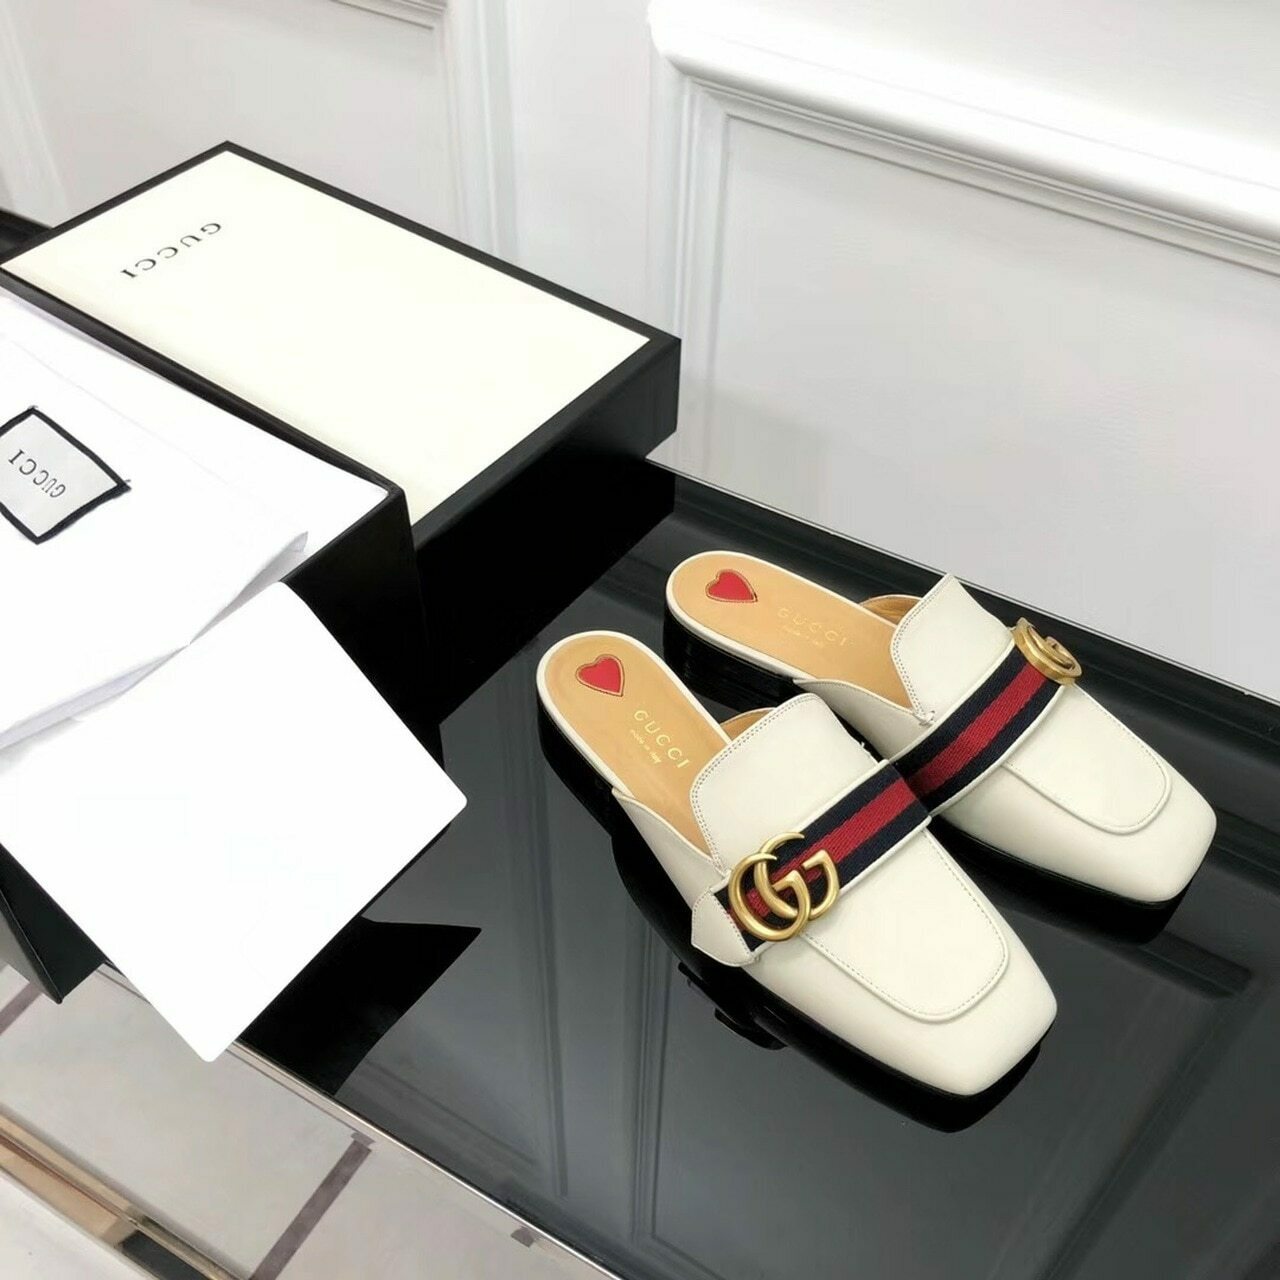 Gucci Peyton Slippers Calfskin Leather Fall/Winter Collection White ...